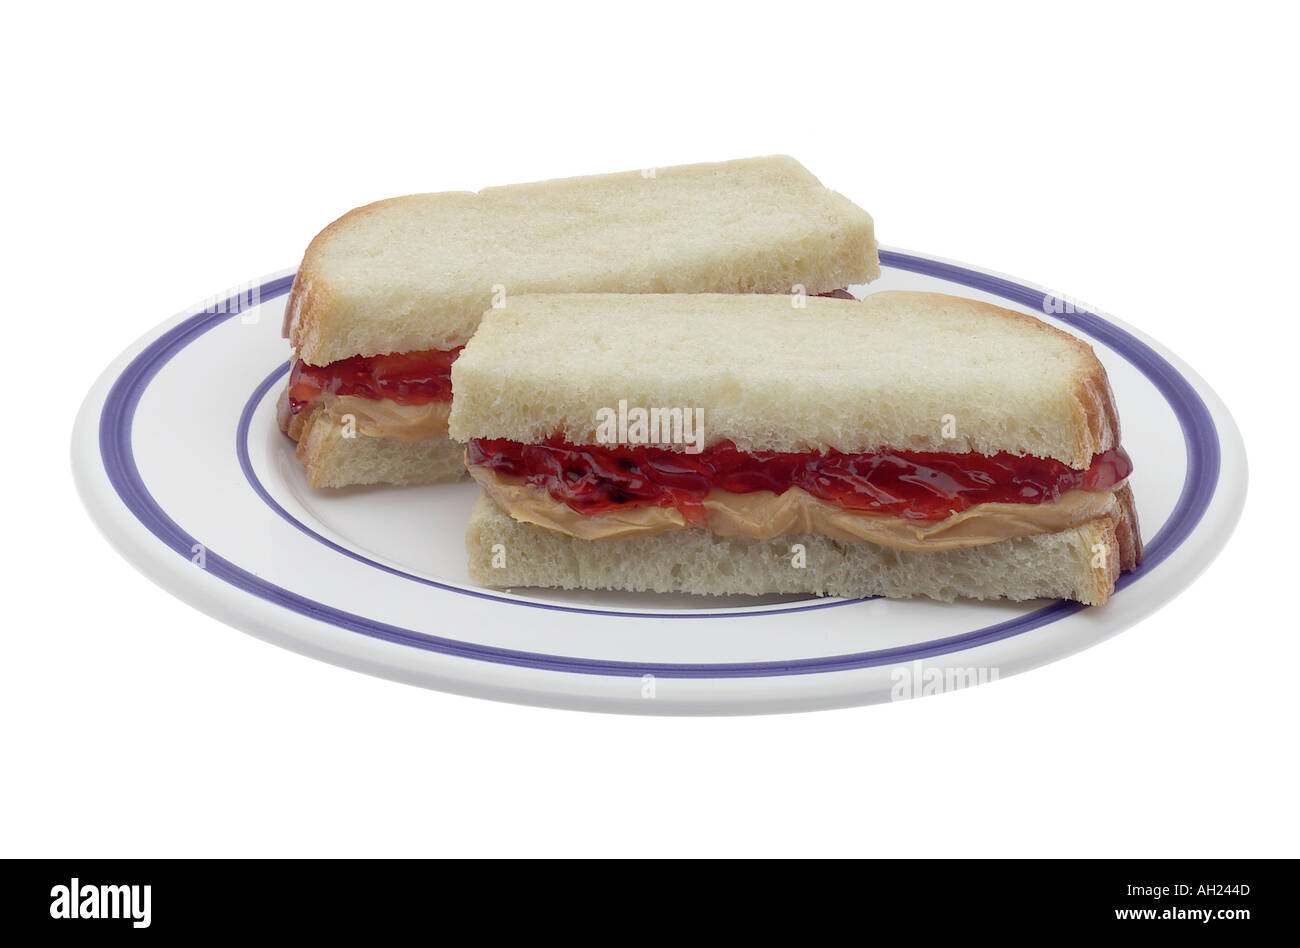 Peanut butter and jelly sandwich on plate silhouetted on white background Stock Photo